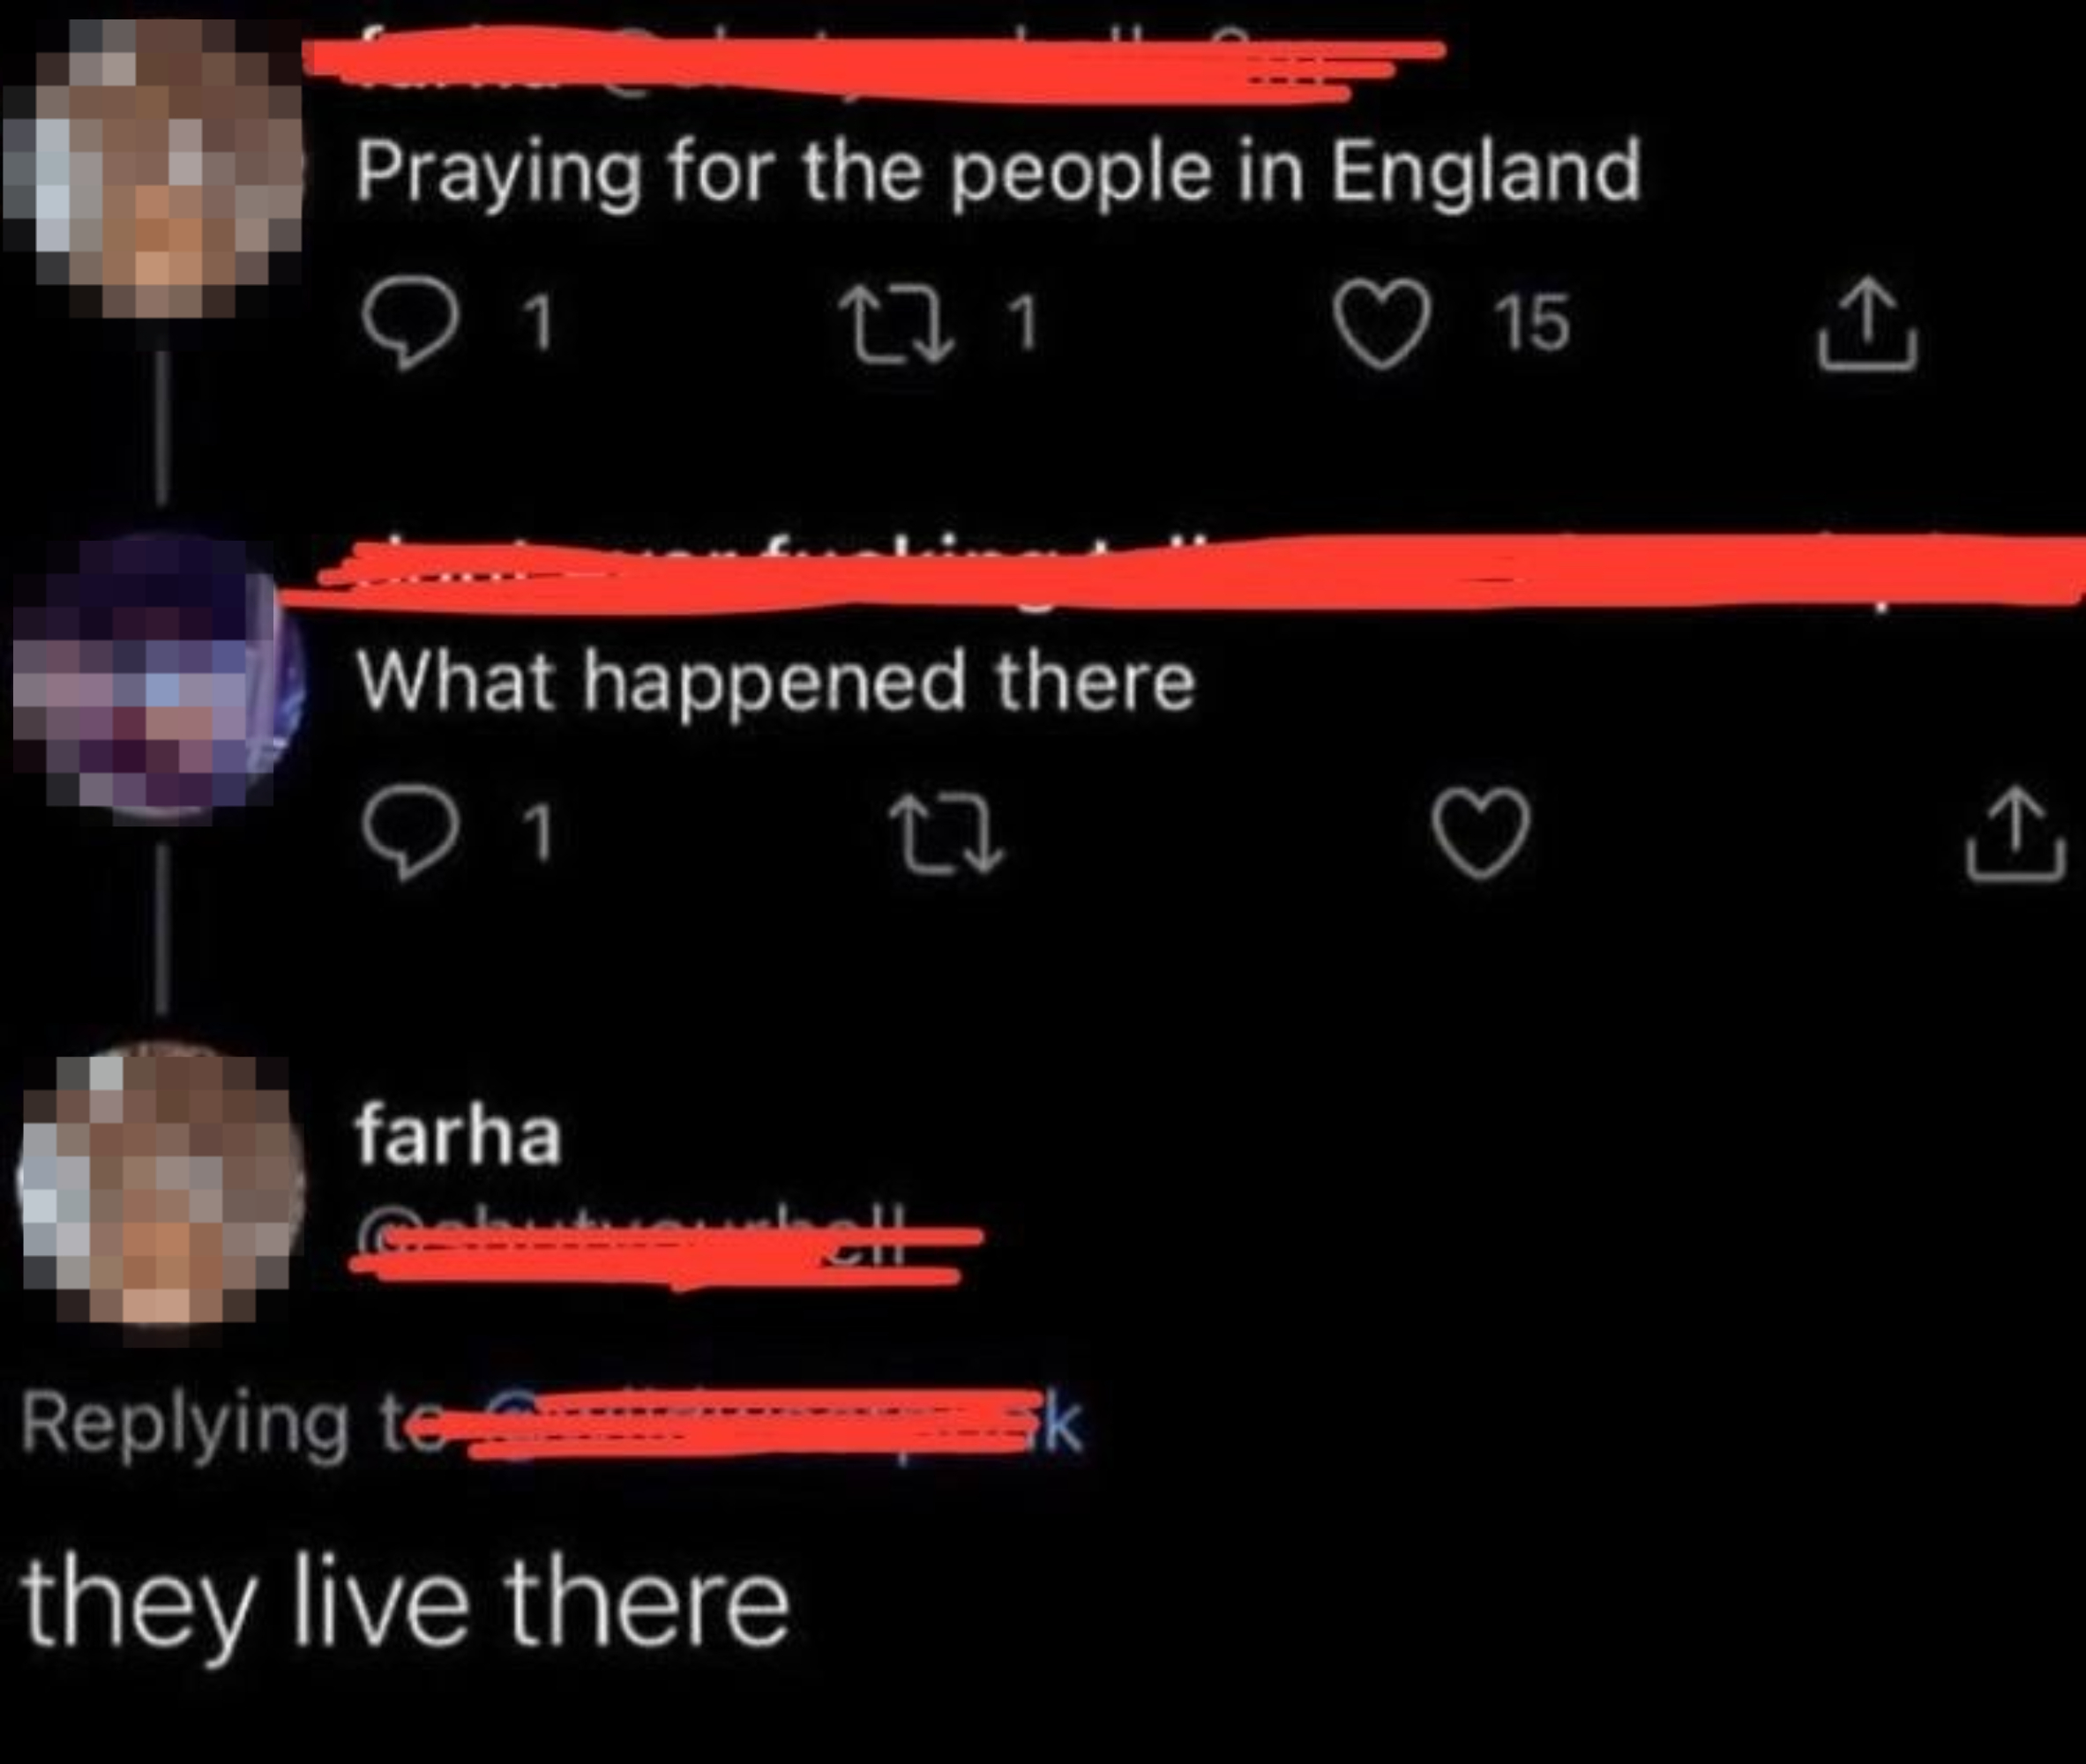 &quot;Praying for the people in England,&quot; &quot;What happened there,&quot; &quot;They live there&quot;